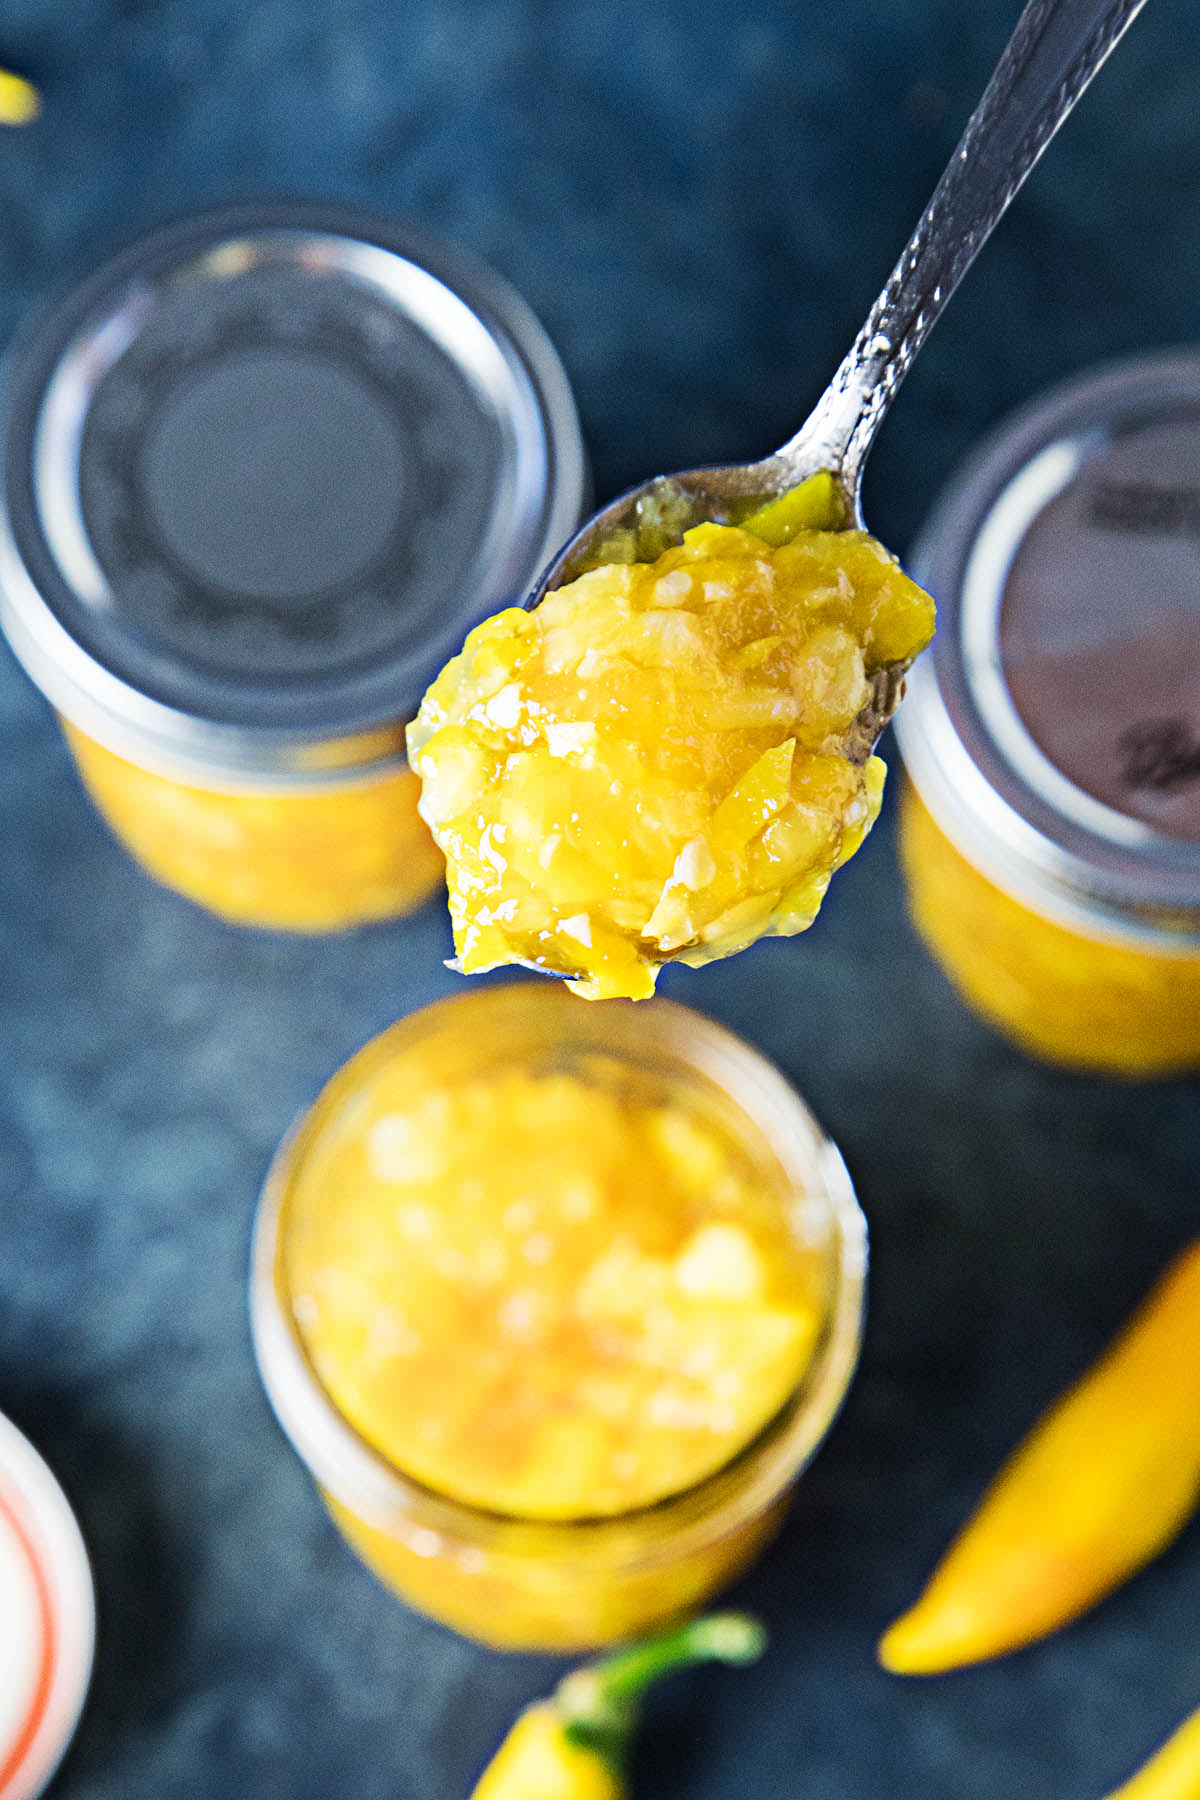 A spoonful of the delicious Pineapple-Mango-Hot Pepper Jam